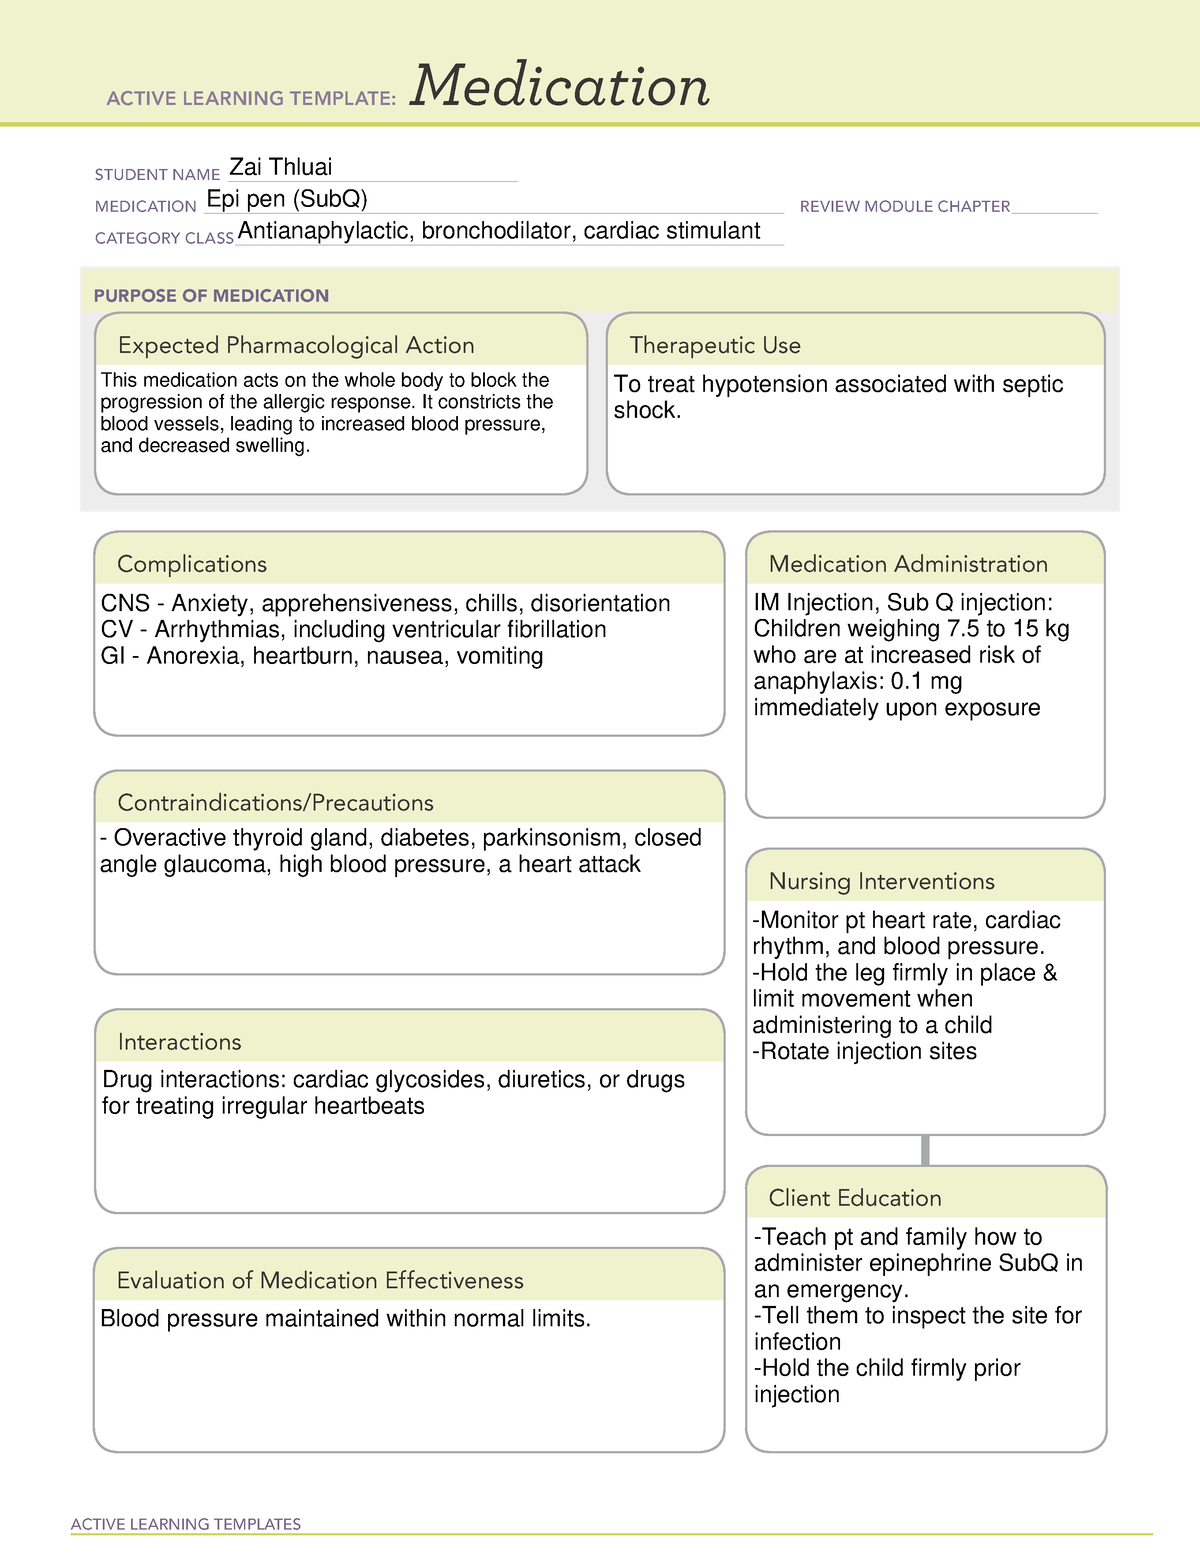 epi-pen-ati-template-active-learning-templates-medication-student